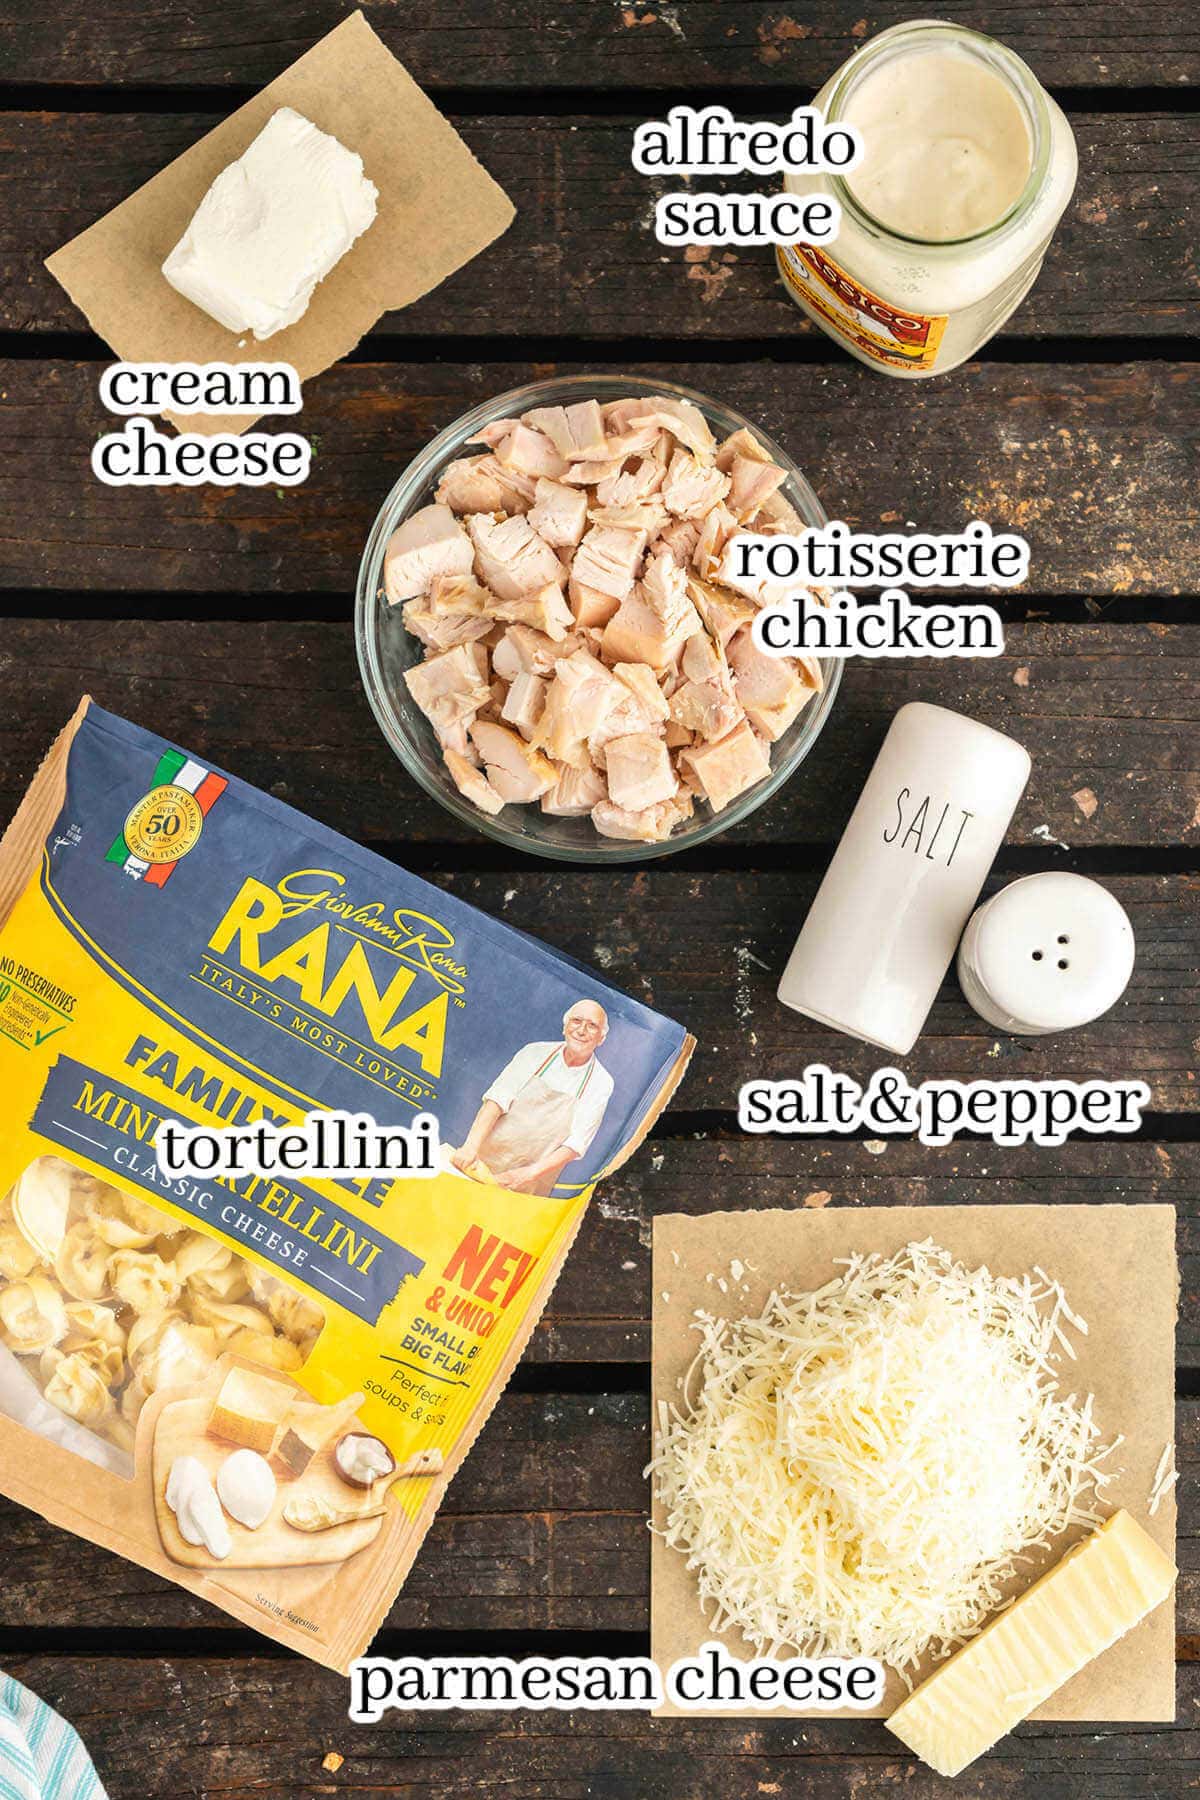 Ingredients to make pasta recipe, with print overlay.